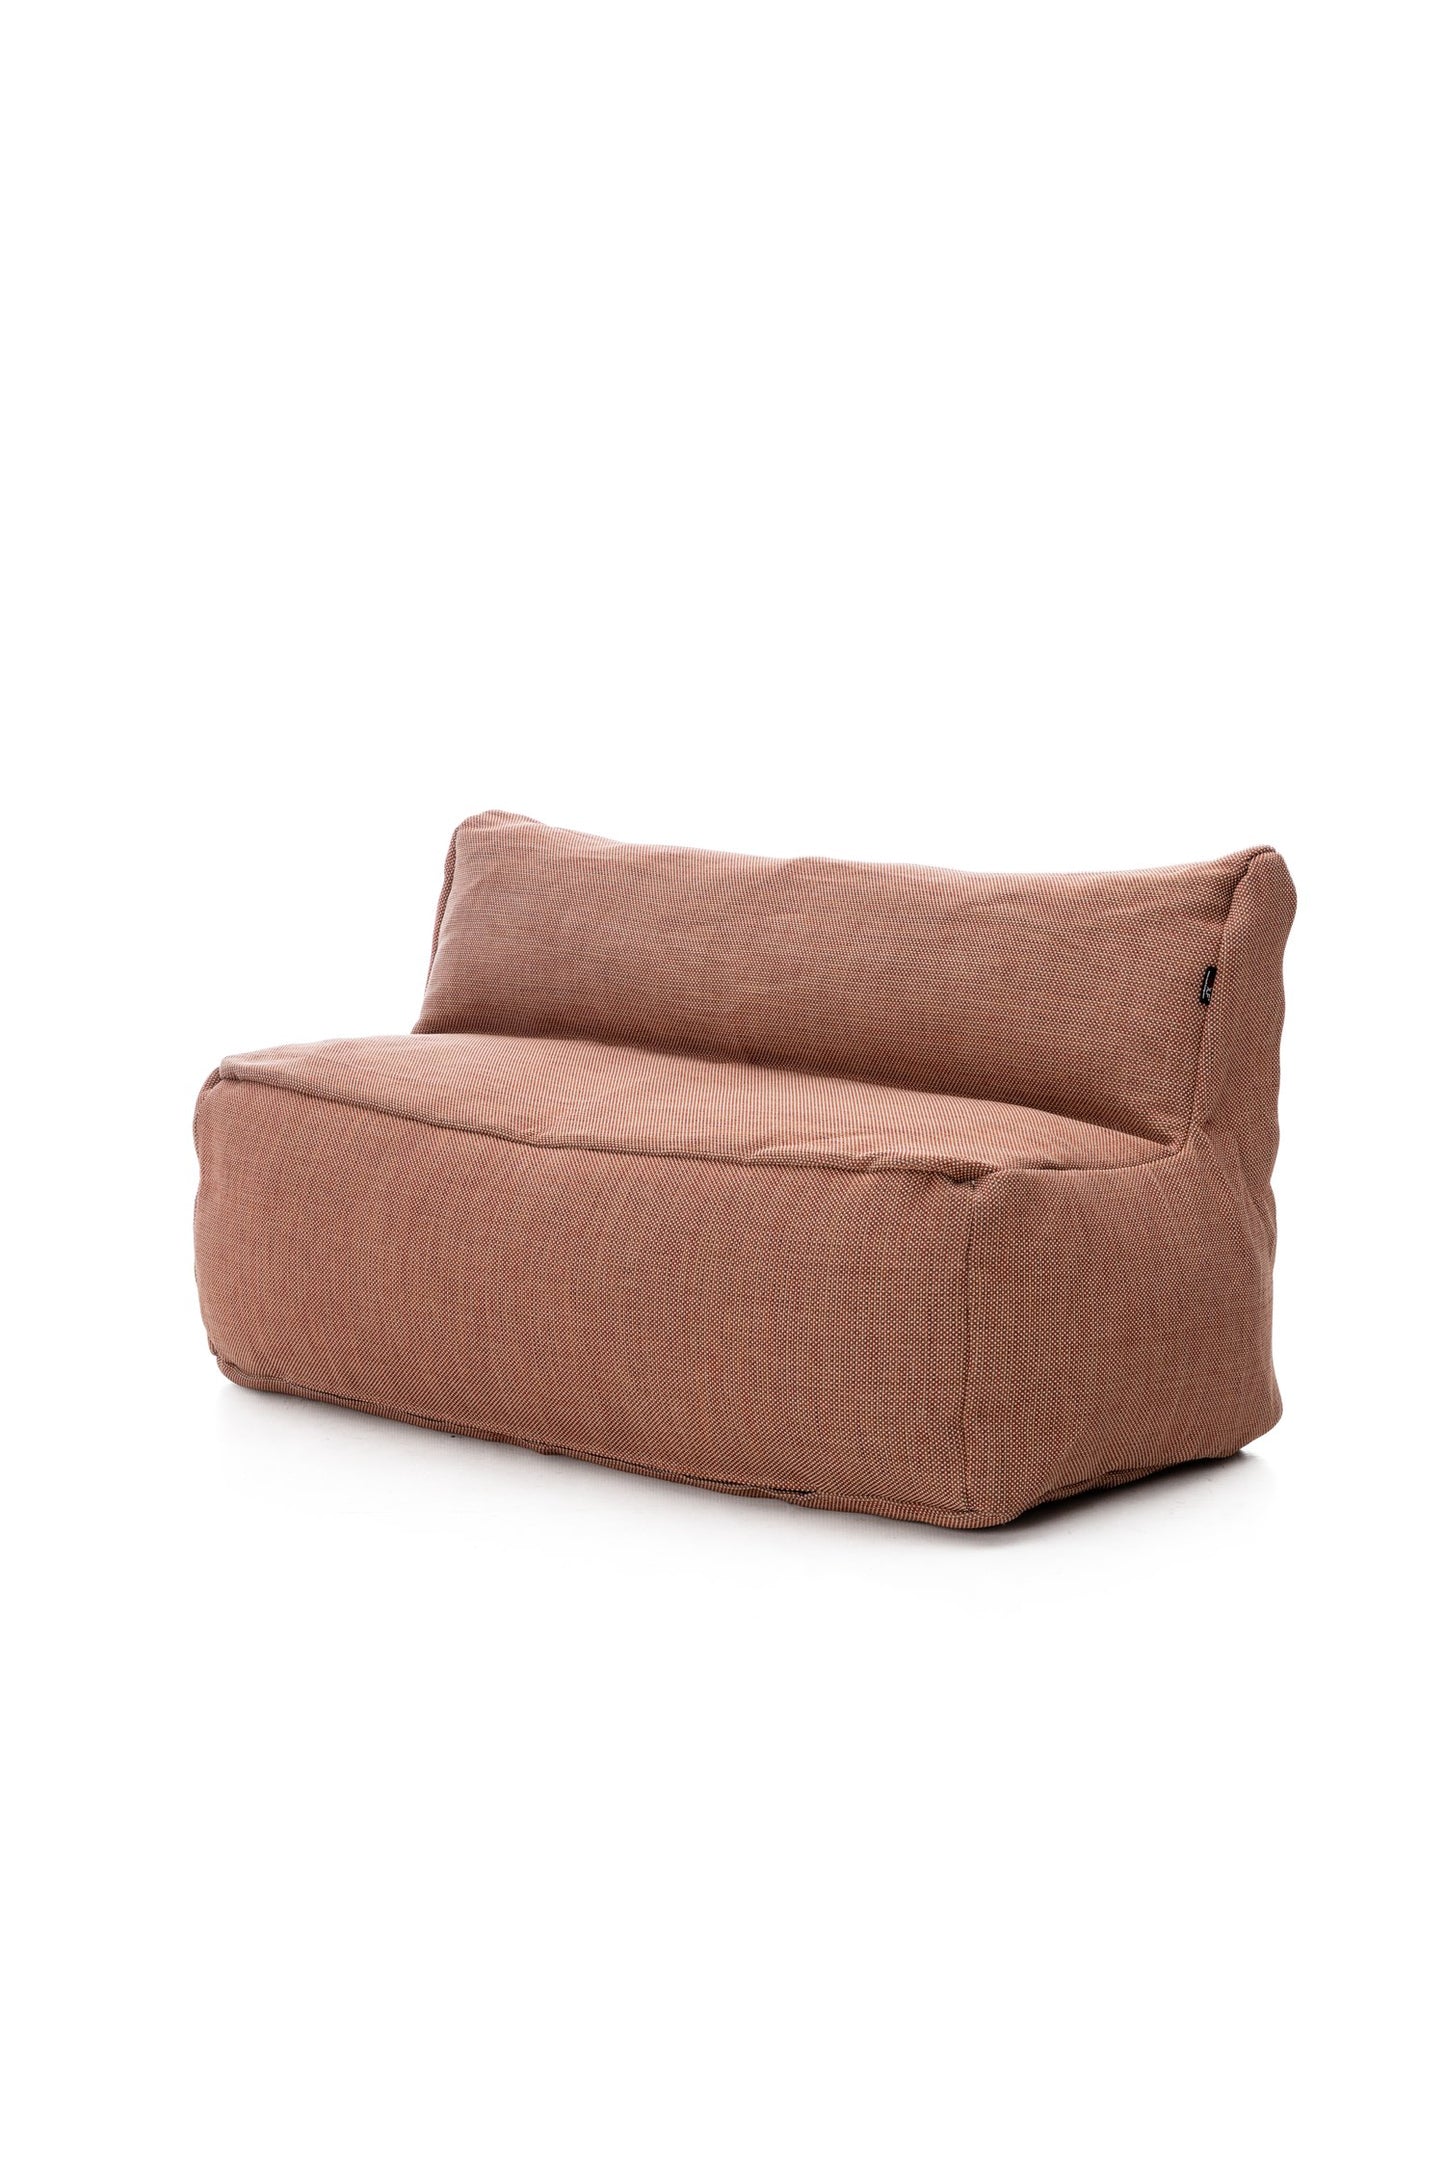 Dotty Love Seat Roolf Living